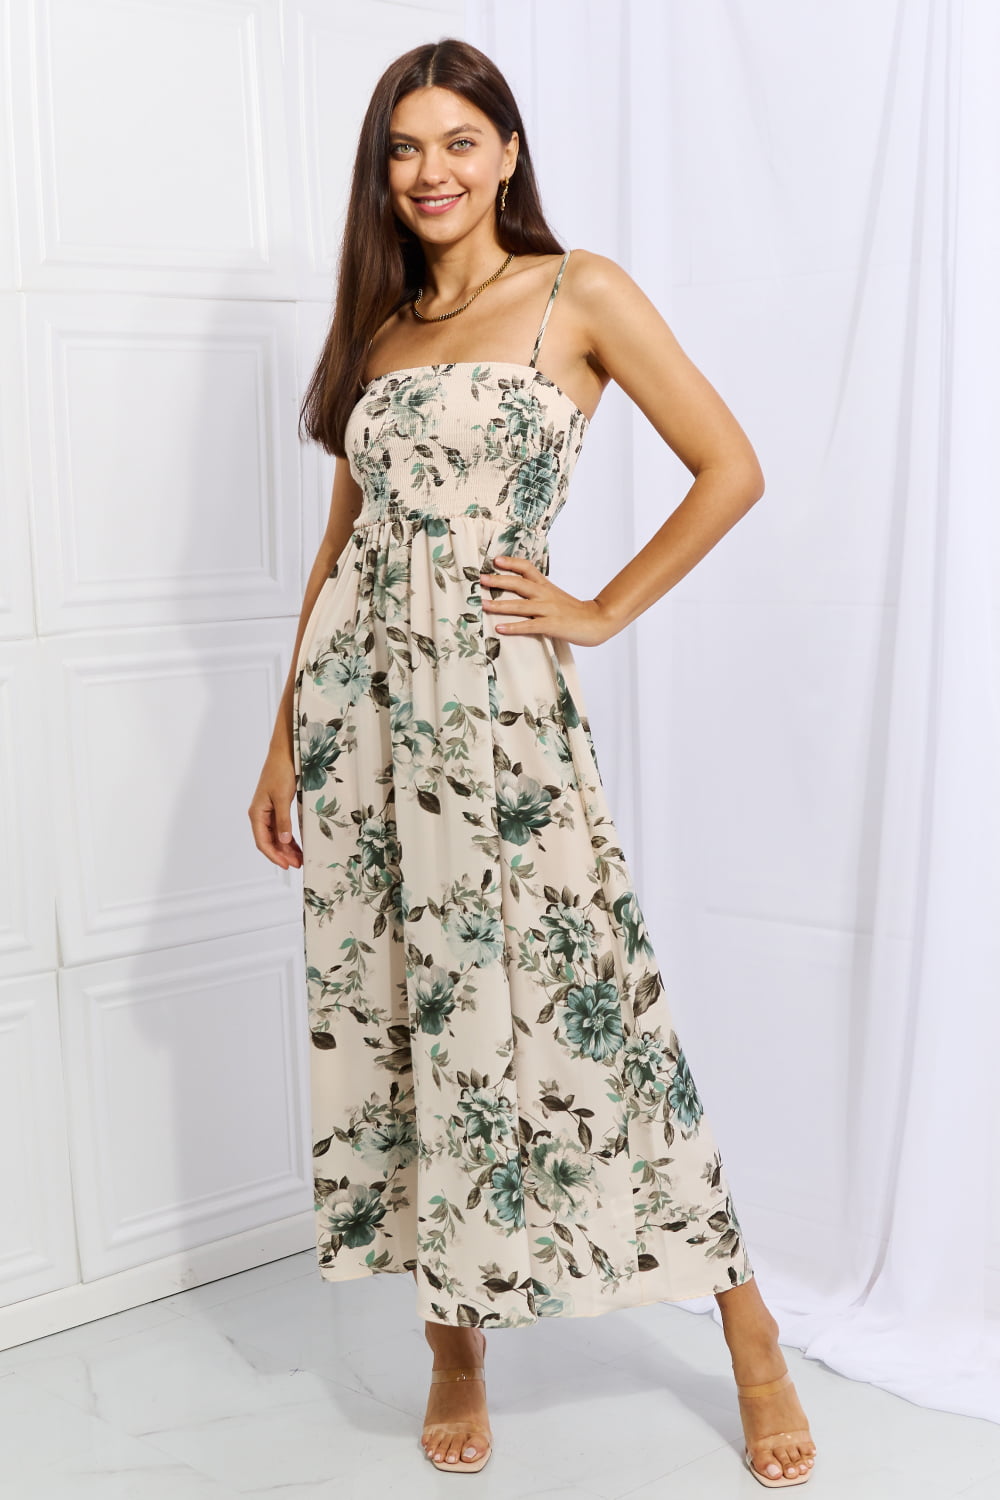 Hold Me Tight Sleevless Floral Maxi Dress in Sage